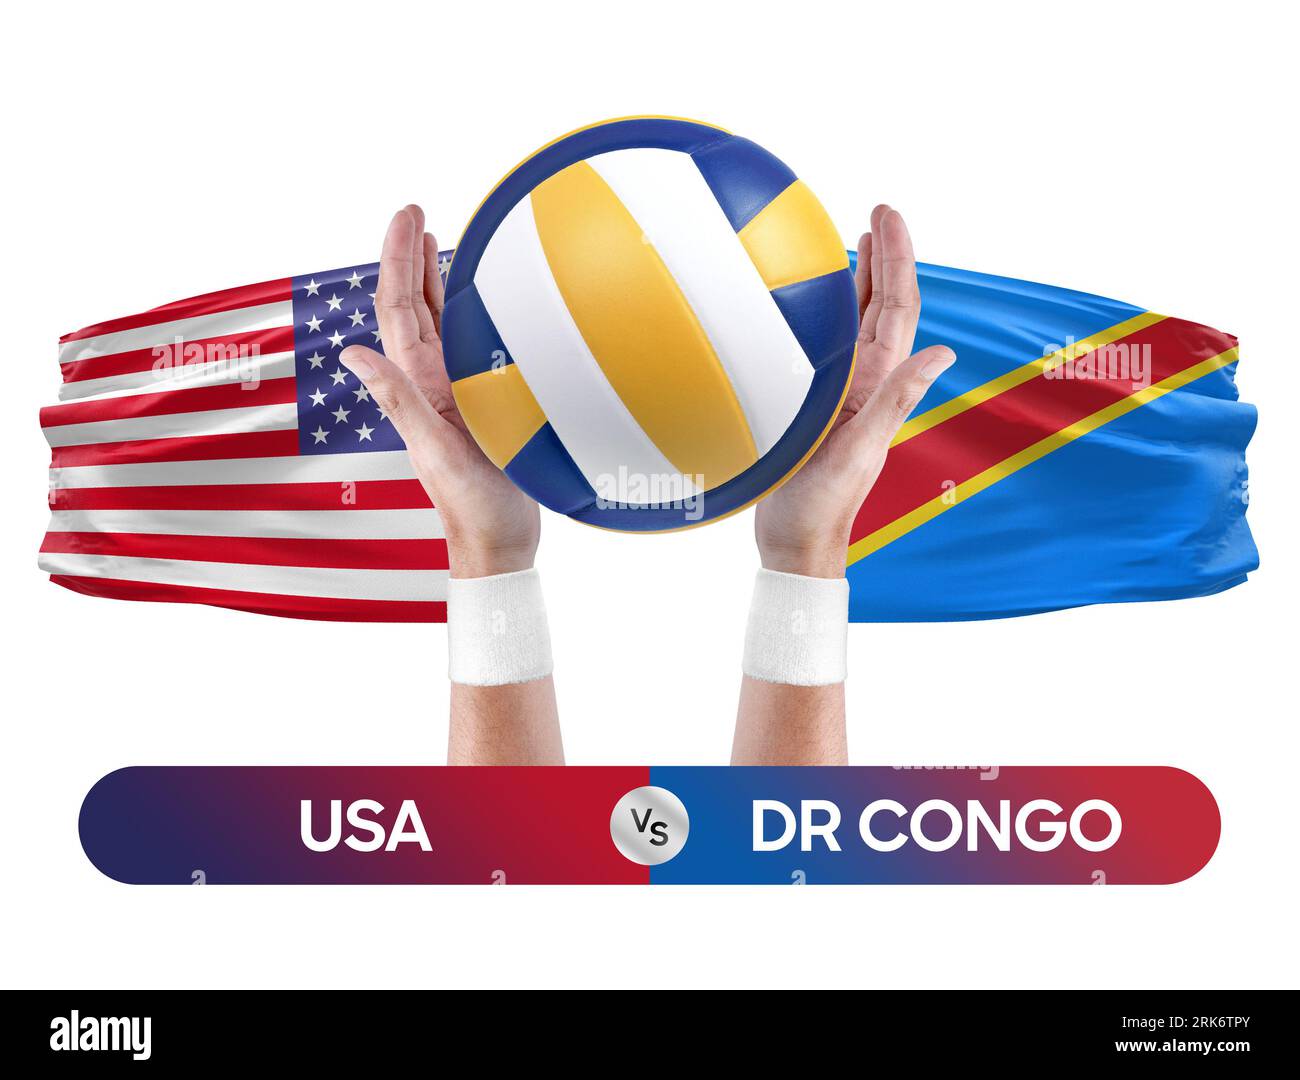 USA vs Dr Congo national teams volleyball volley ball match competition concept. Stock Photo